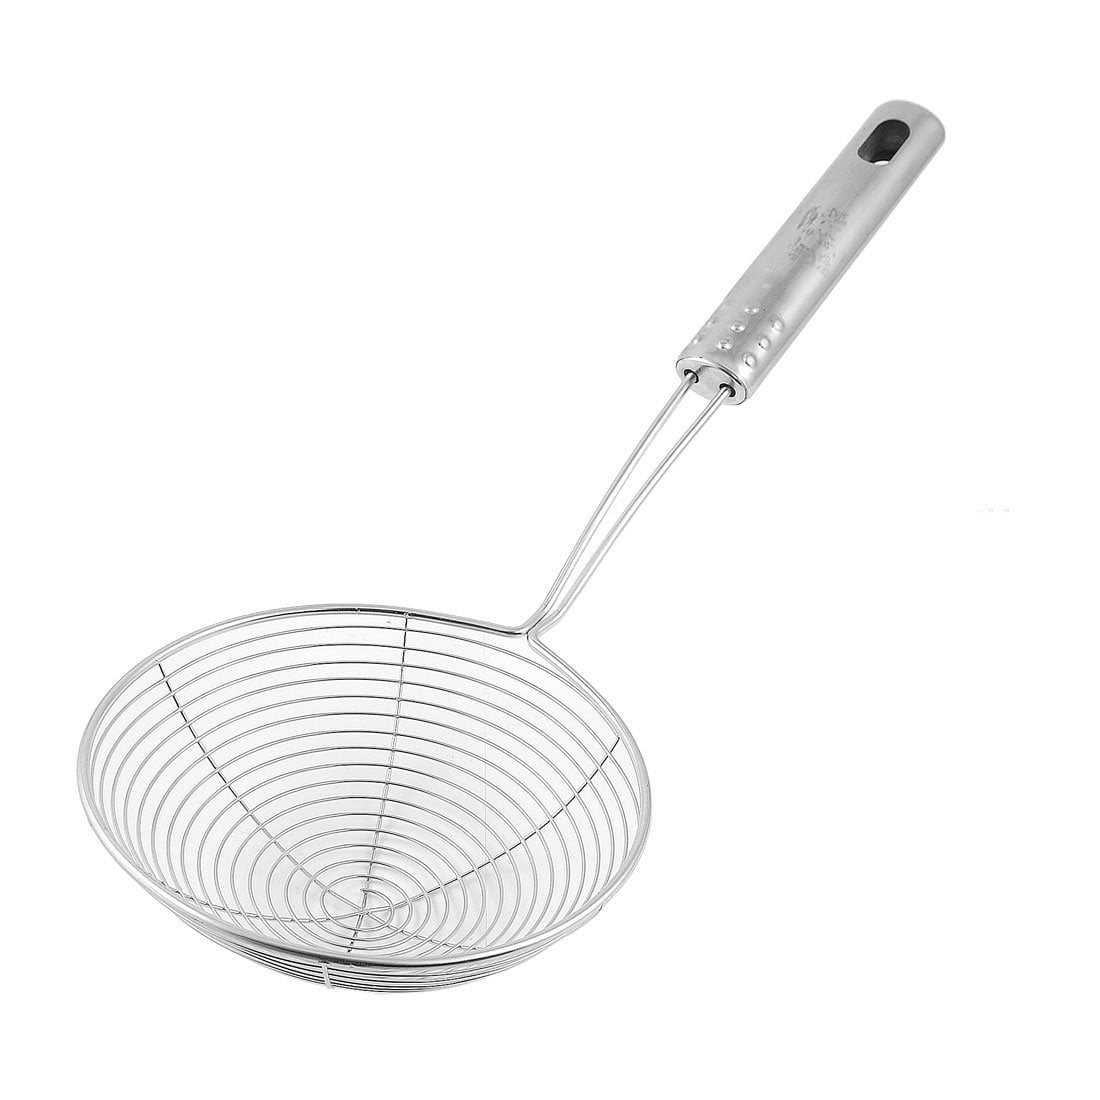 1Pack Skimmer Spoon, Stainless Steel Spider Strainer Skimmer Spoon Grease  Fine Mesh Strainer Skimmer Spoons for Cooking Frying Skimming Grease, Foam  and Gravy 